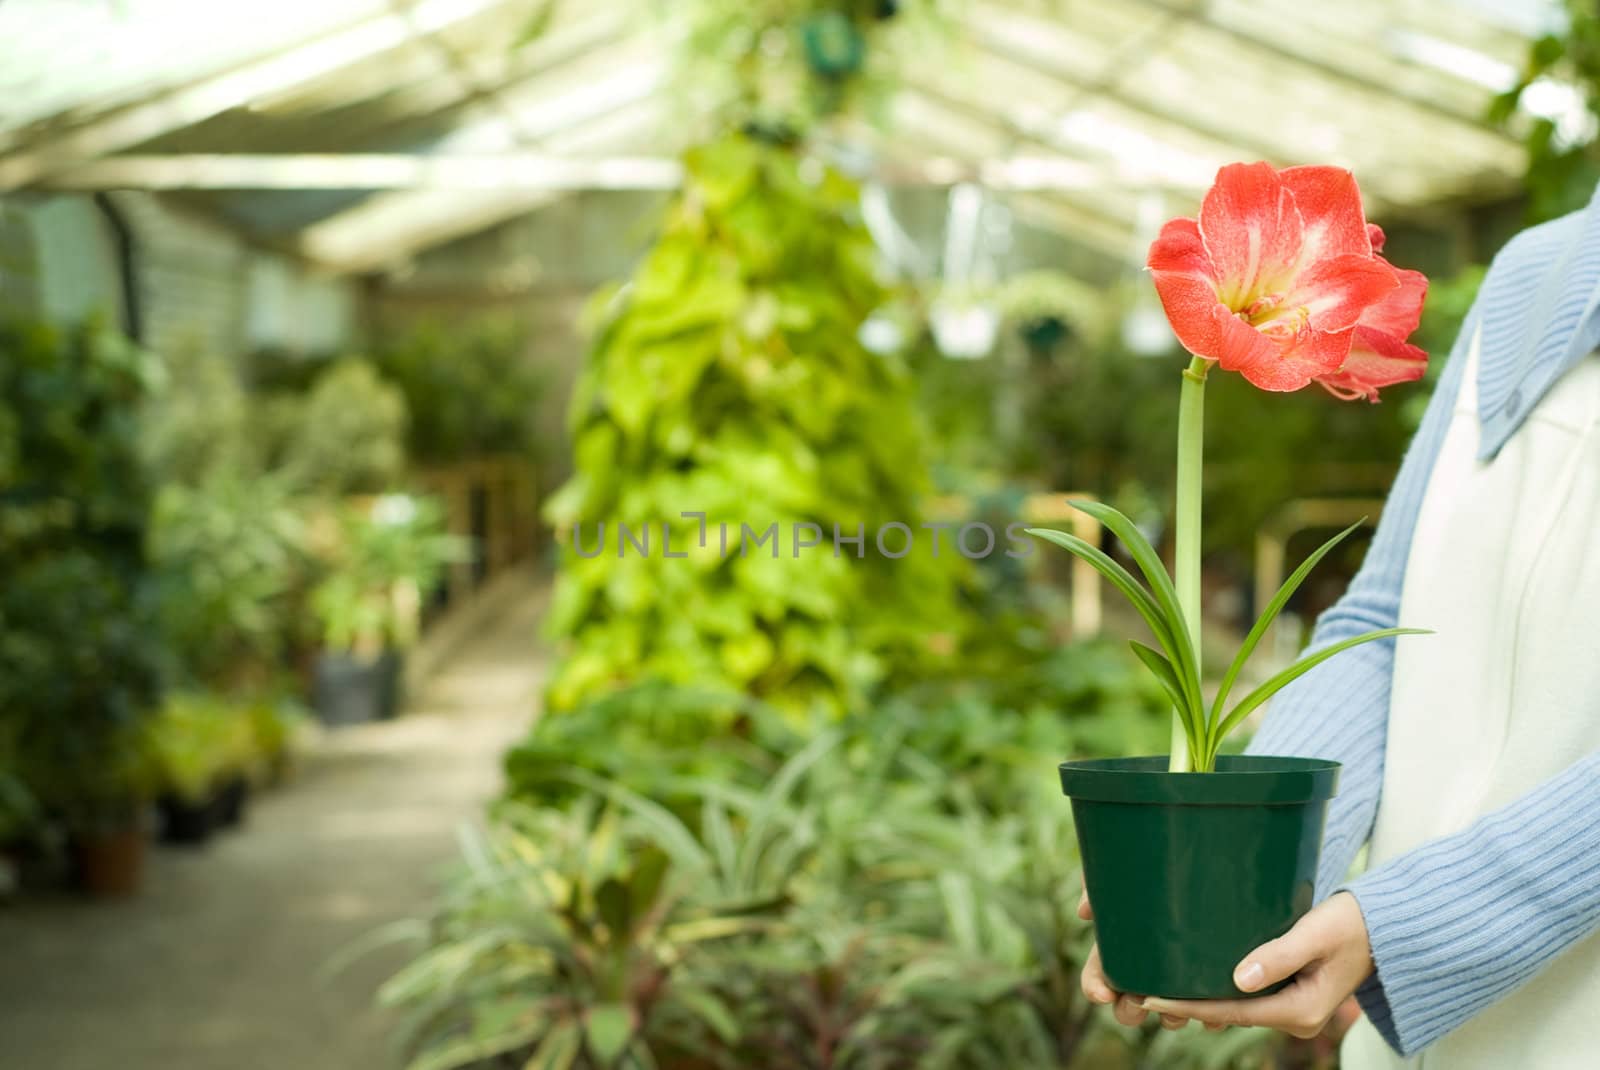 Selecting Beautifull Red Flower in a Greenhouse at the Nursery